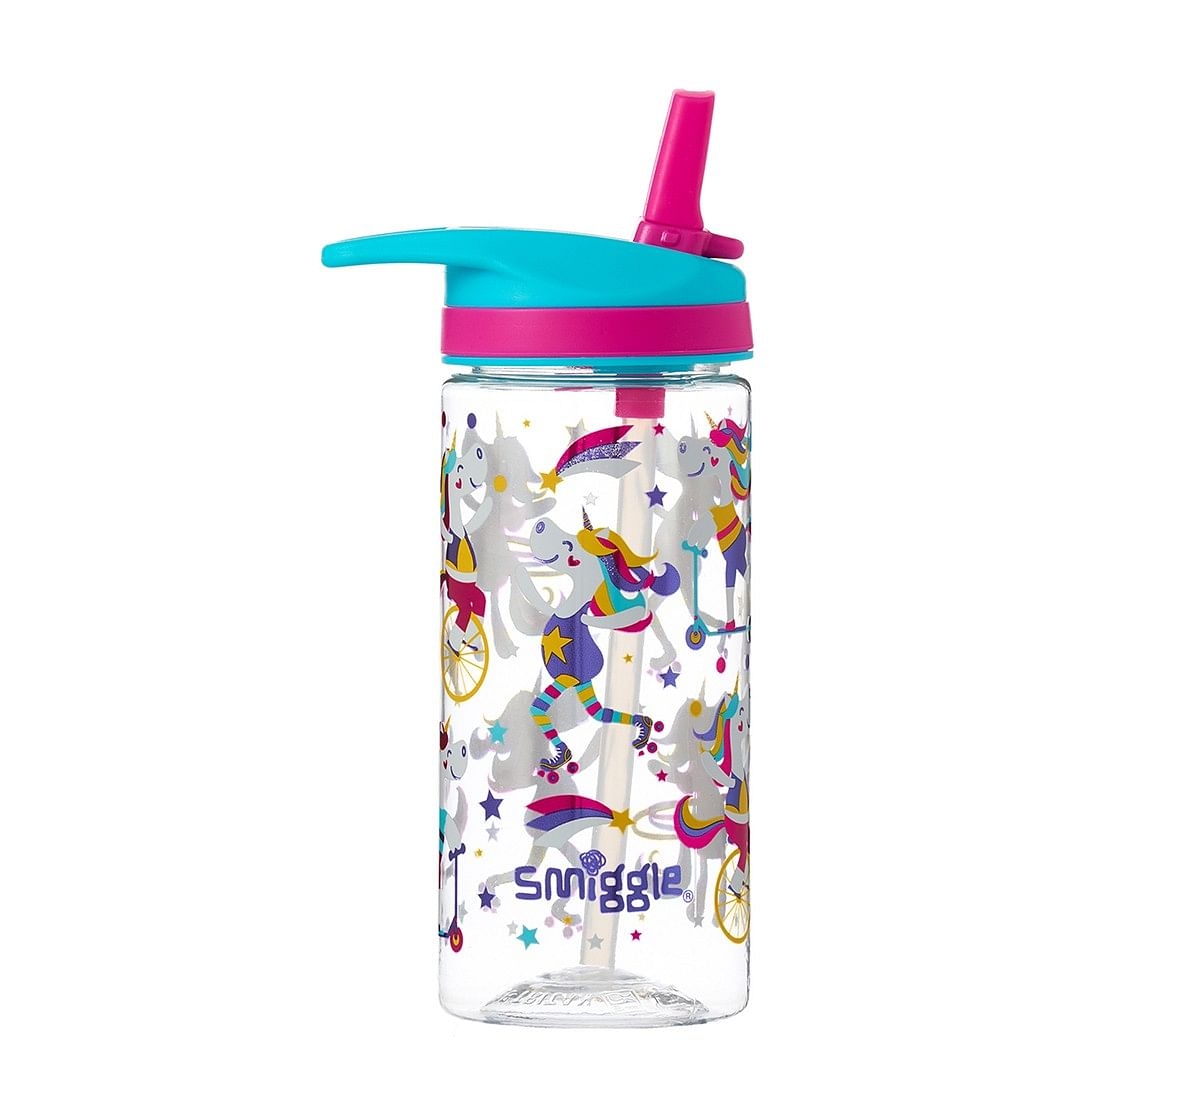 Smiggle Whirl Junior Bottle with Flip Top Spout - Unicorn Print Bags for Kids age 3Y+ (Mint)